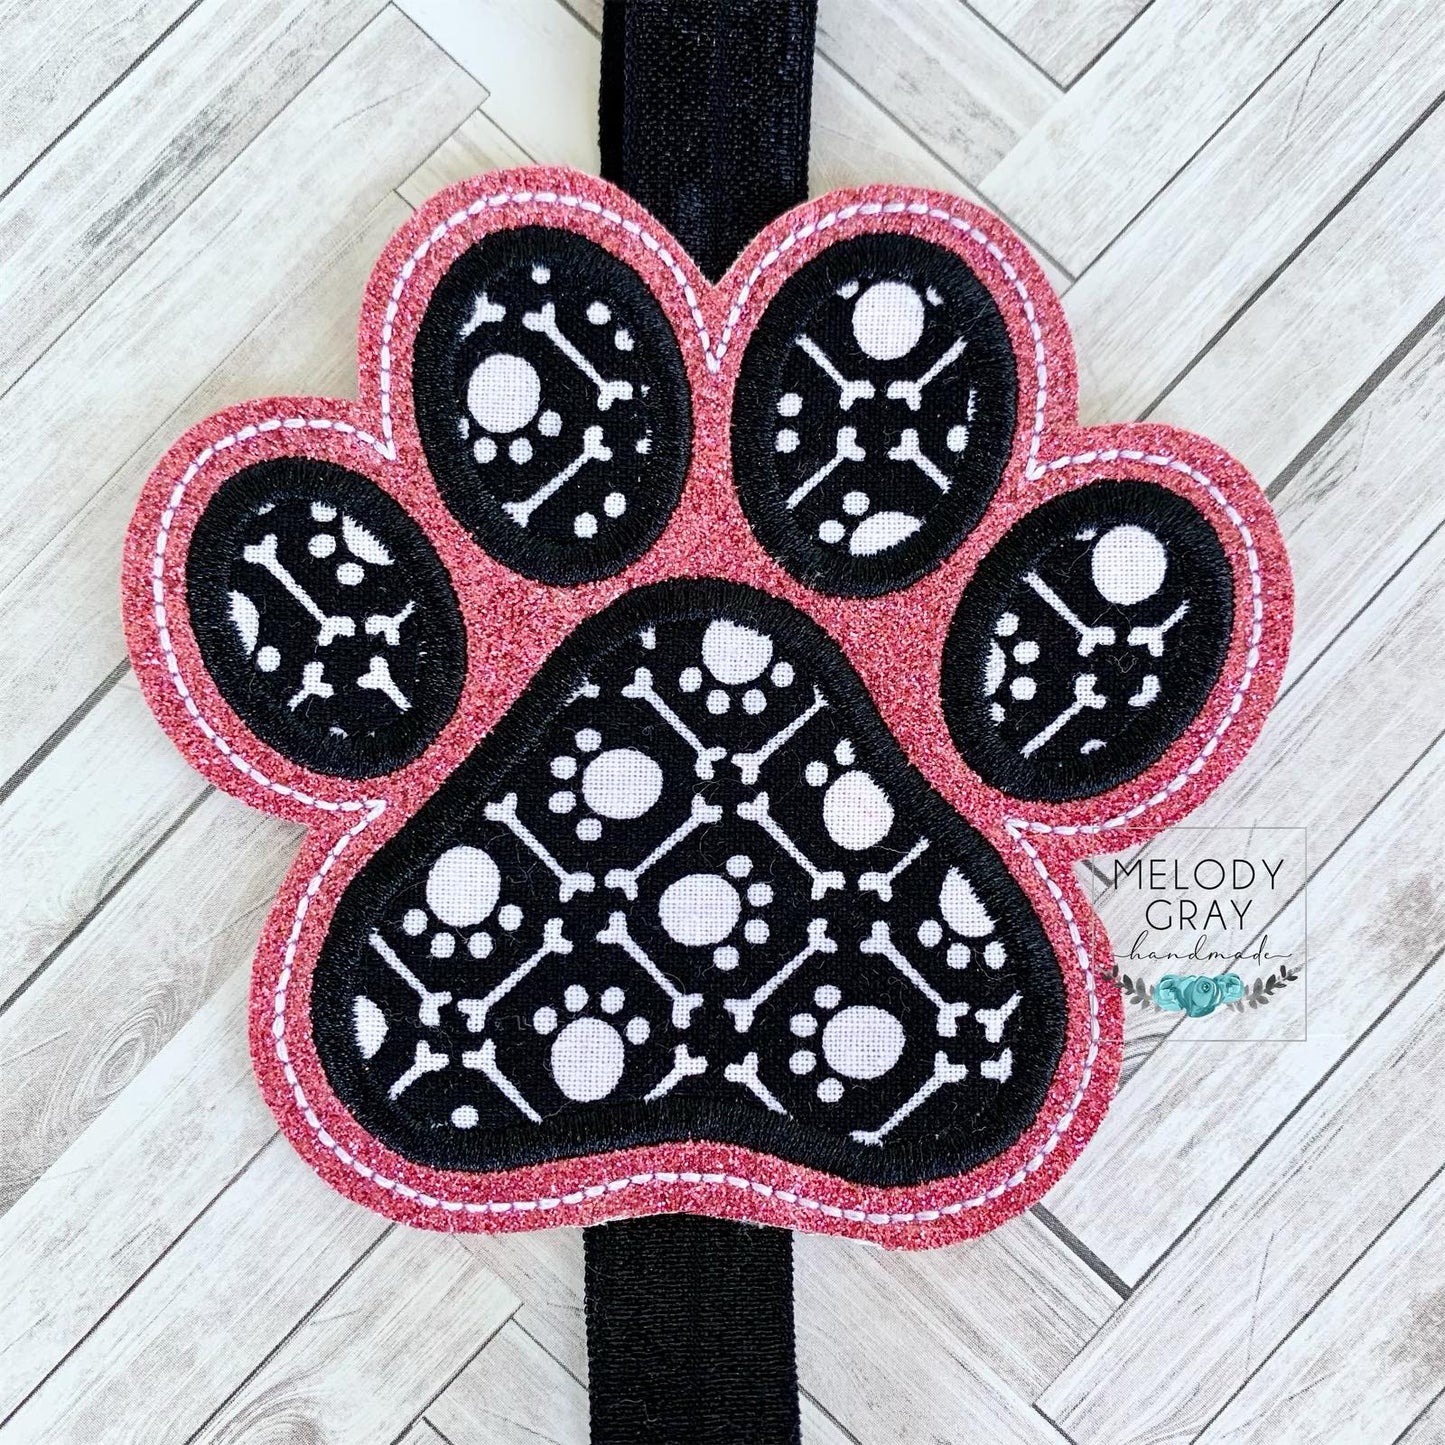 Paw Print Applique Book Band - Embroidery Design, Digital File